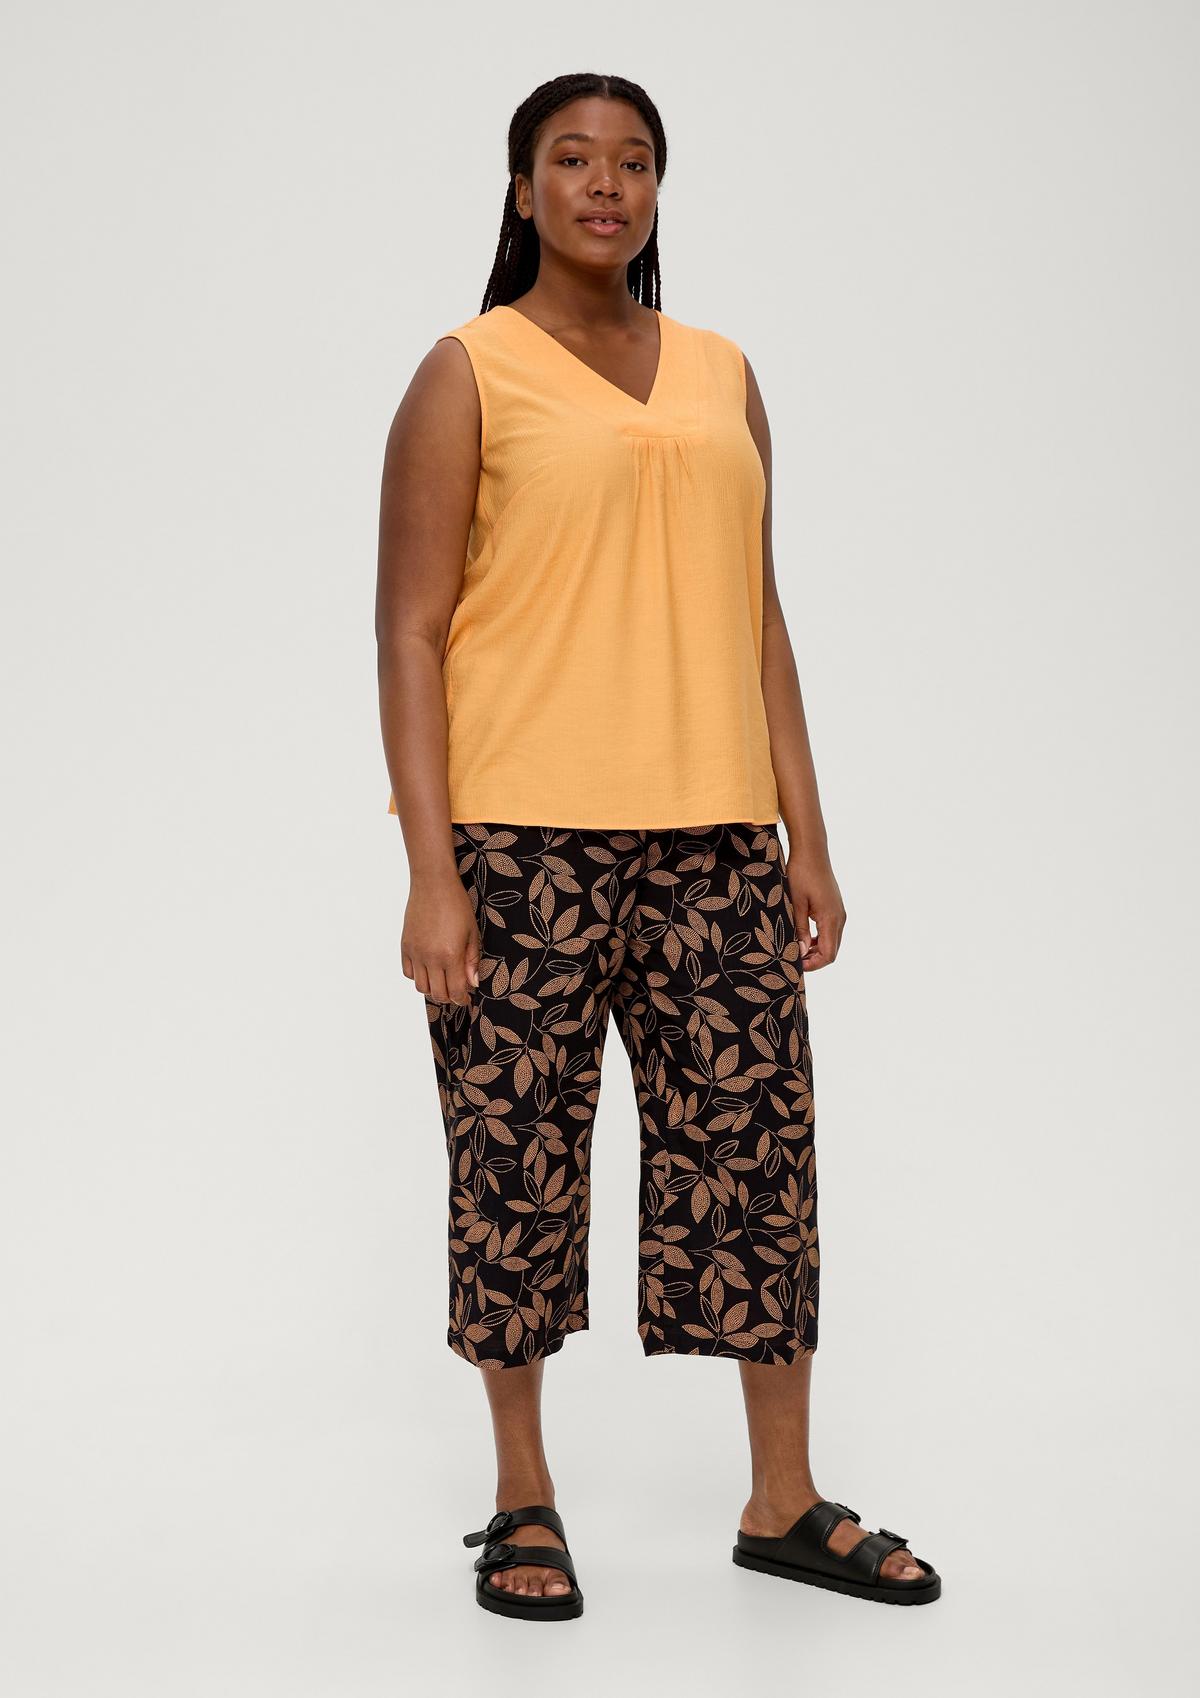 Culottes: Order now online in the shop